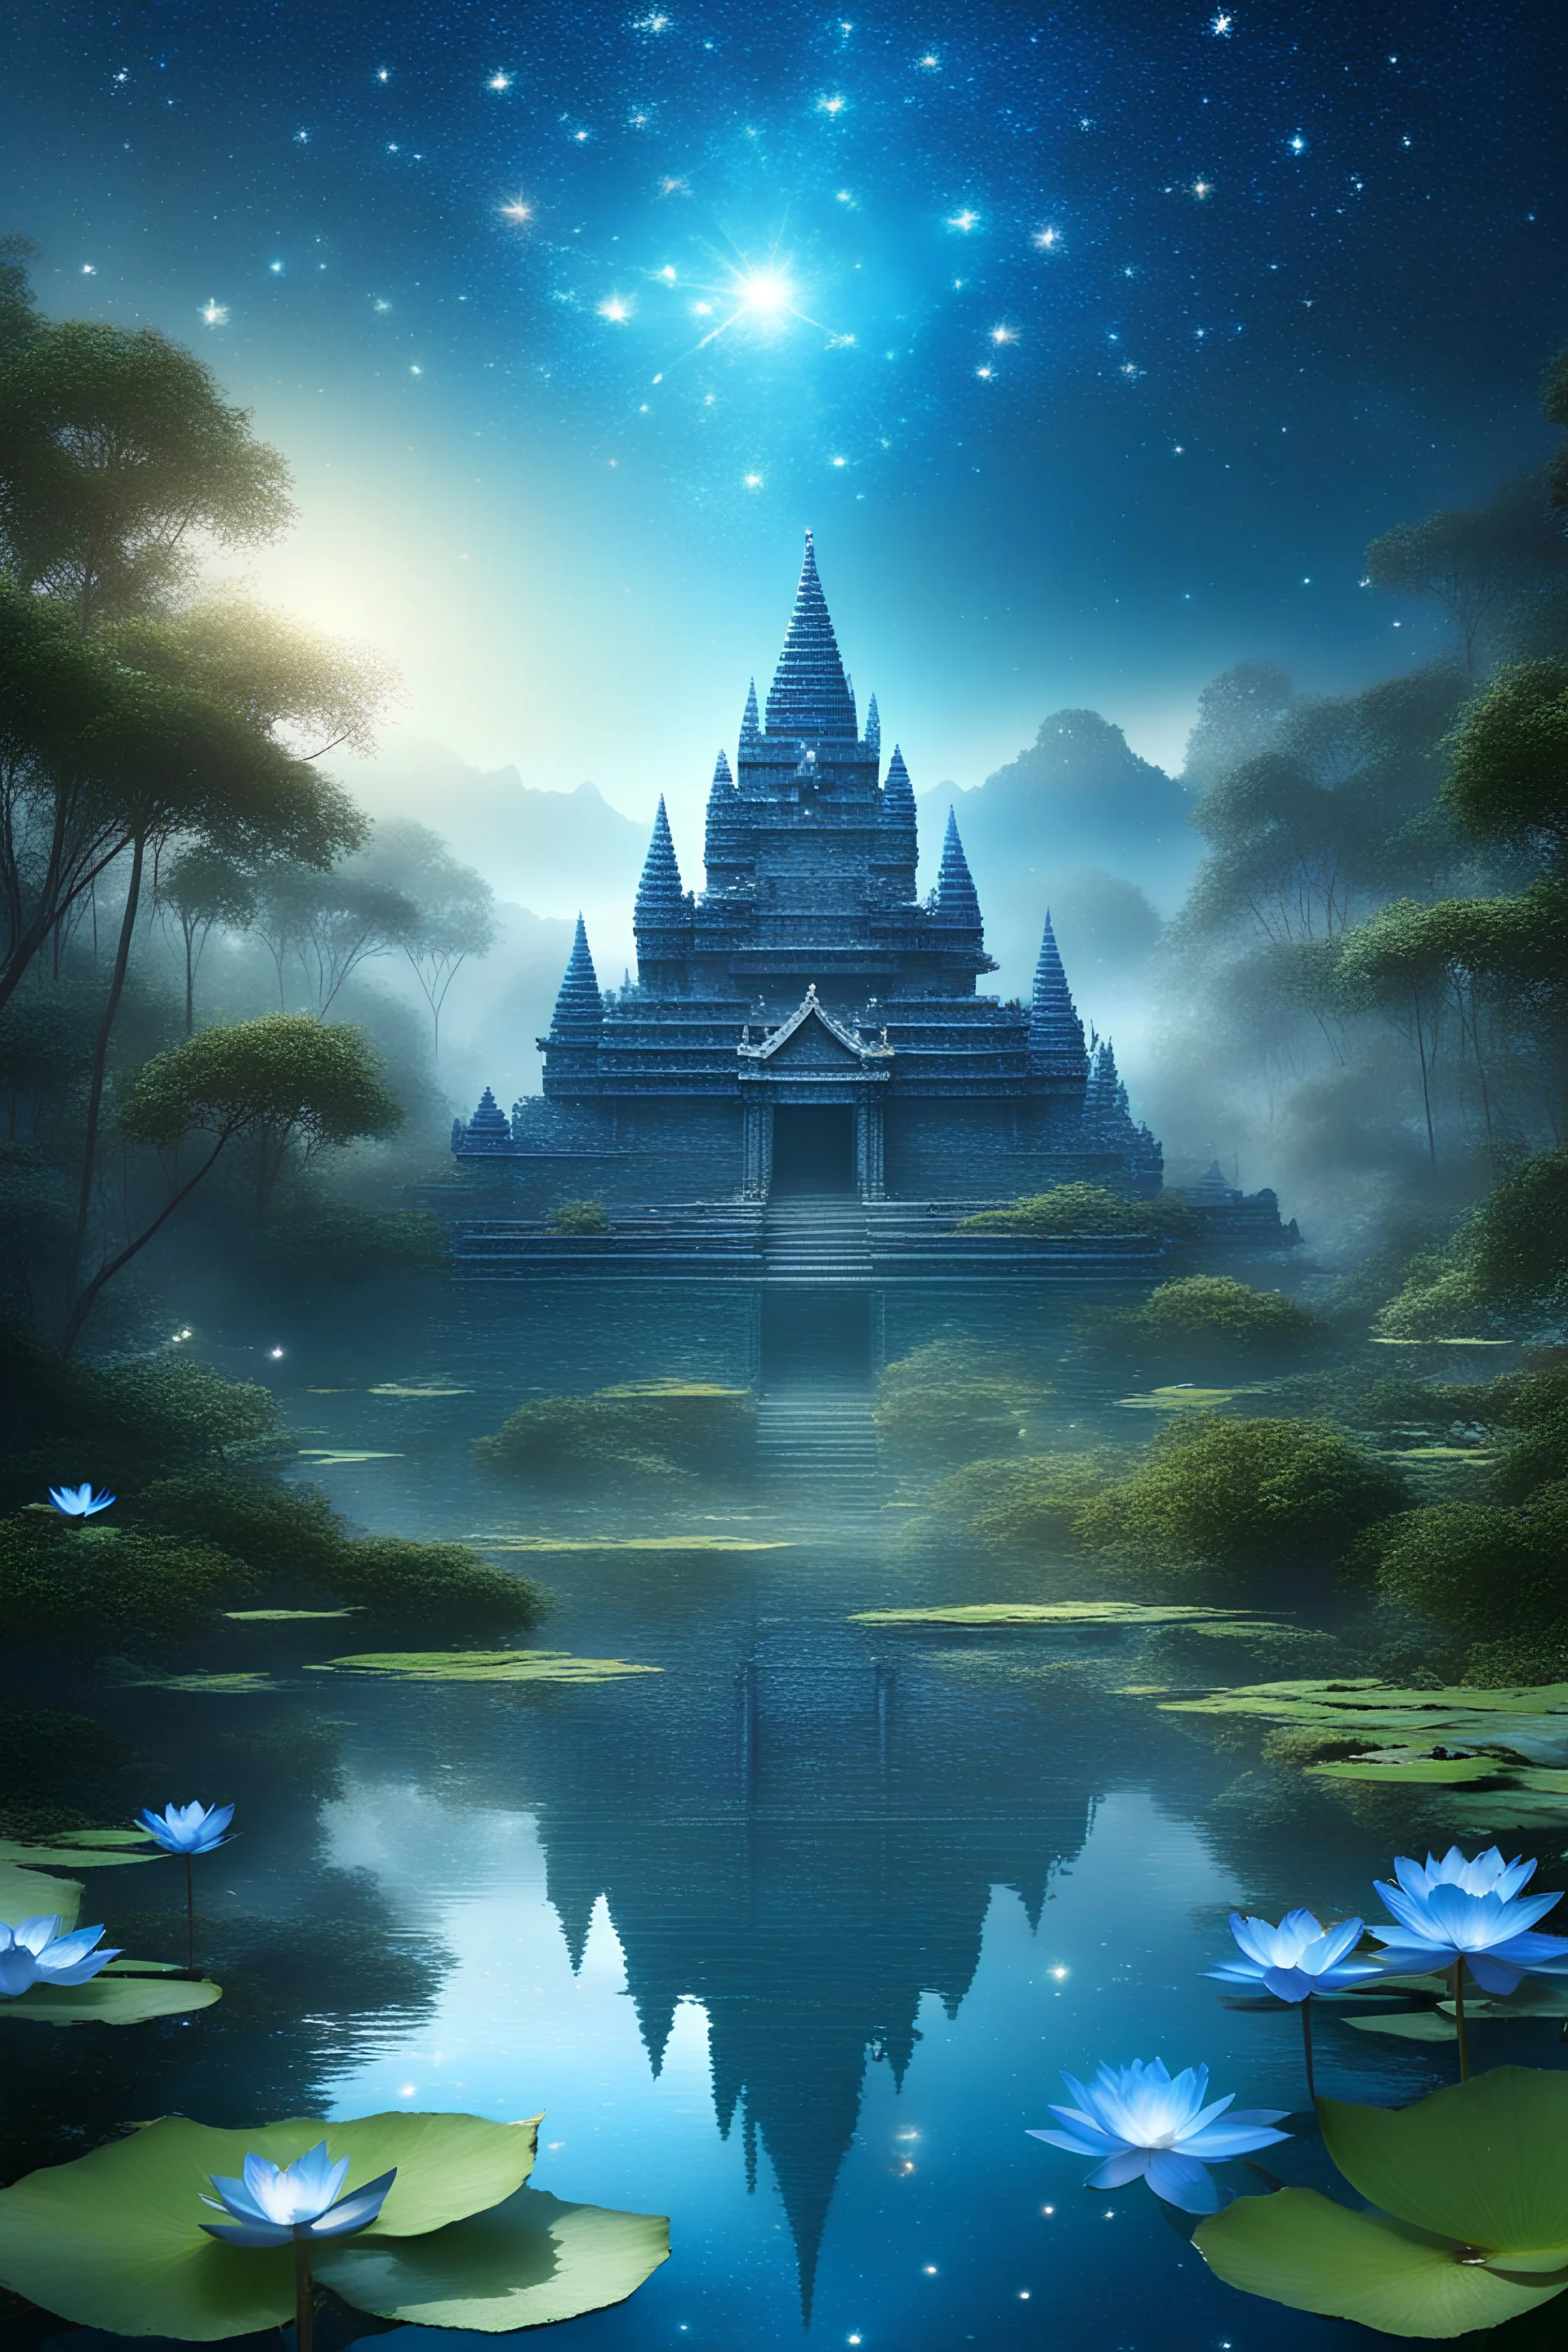 lost temple aztec of a magic lake full of lotus flowers and fairytale castle in the background with sparkling white stars tiny electric blue butterflies